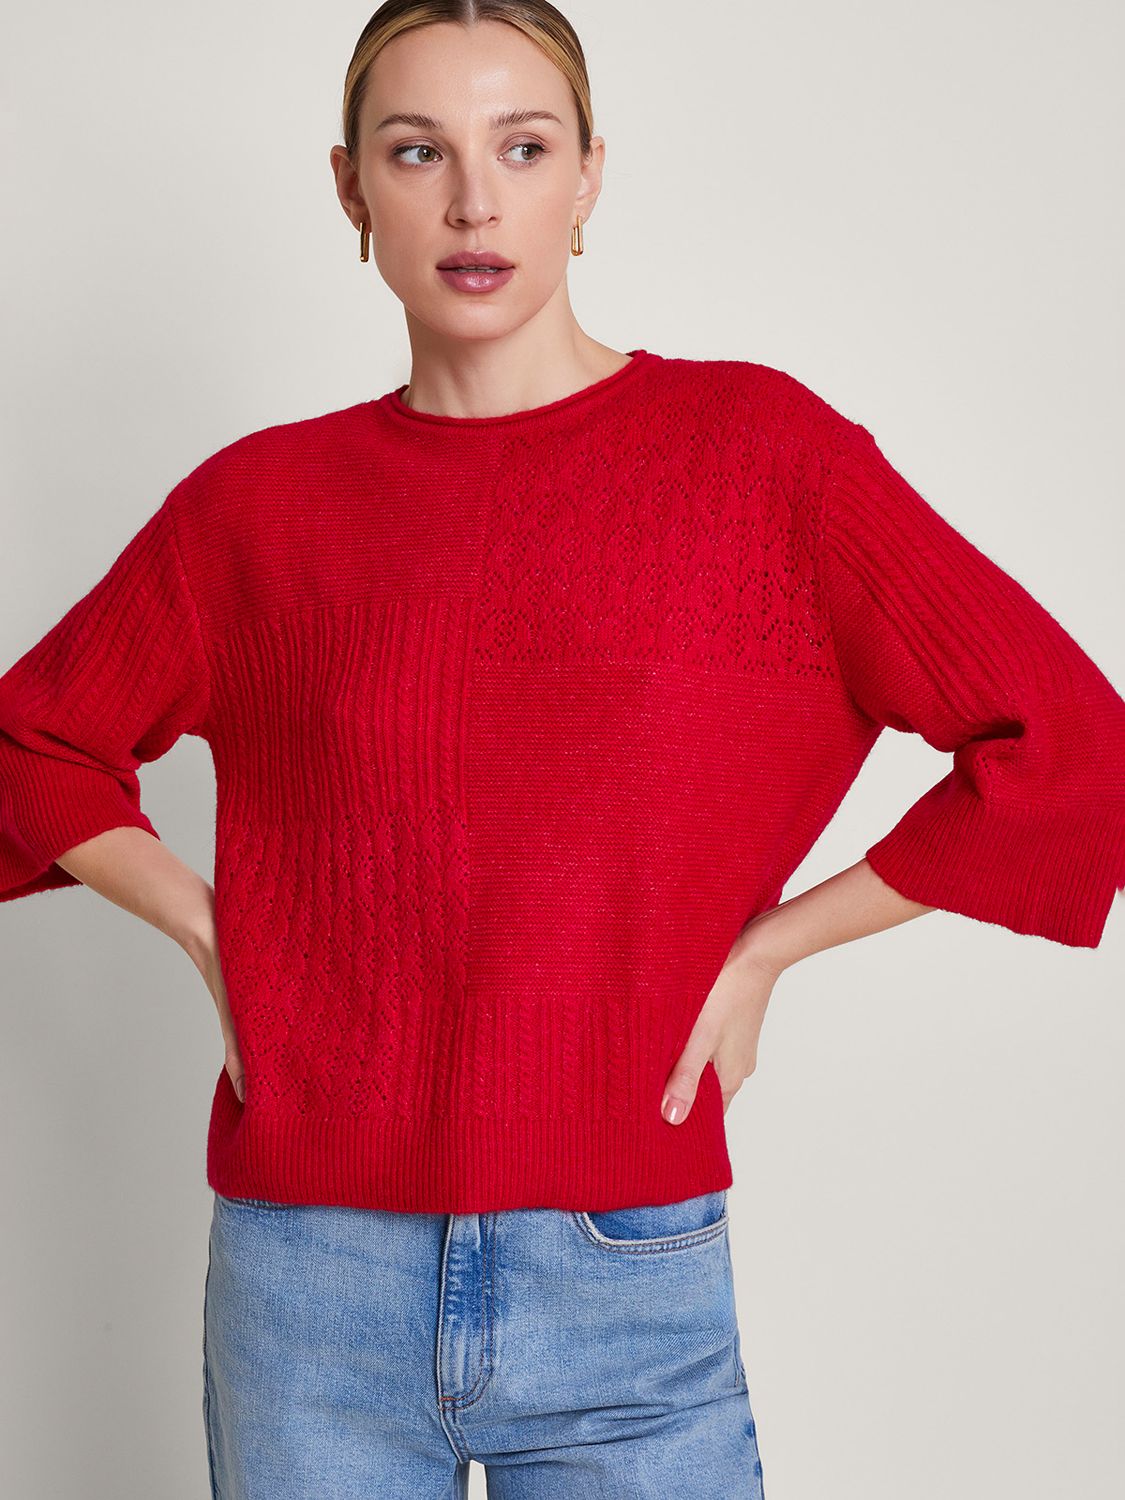 Monsoon San Supersoft Mixed Texture Jumper, Red, S